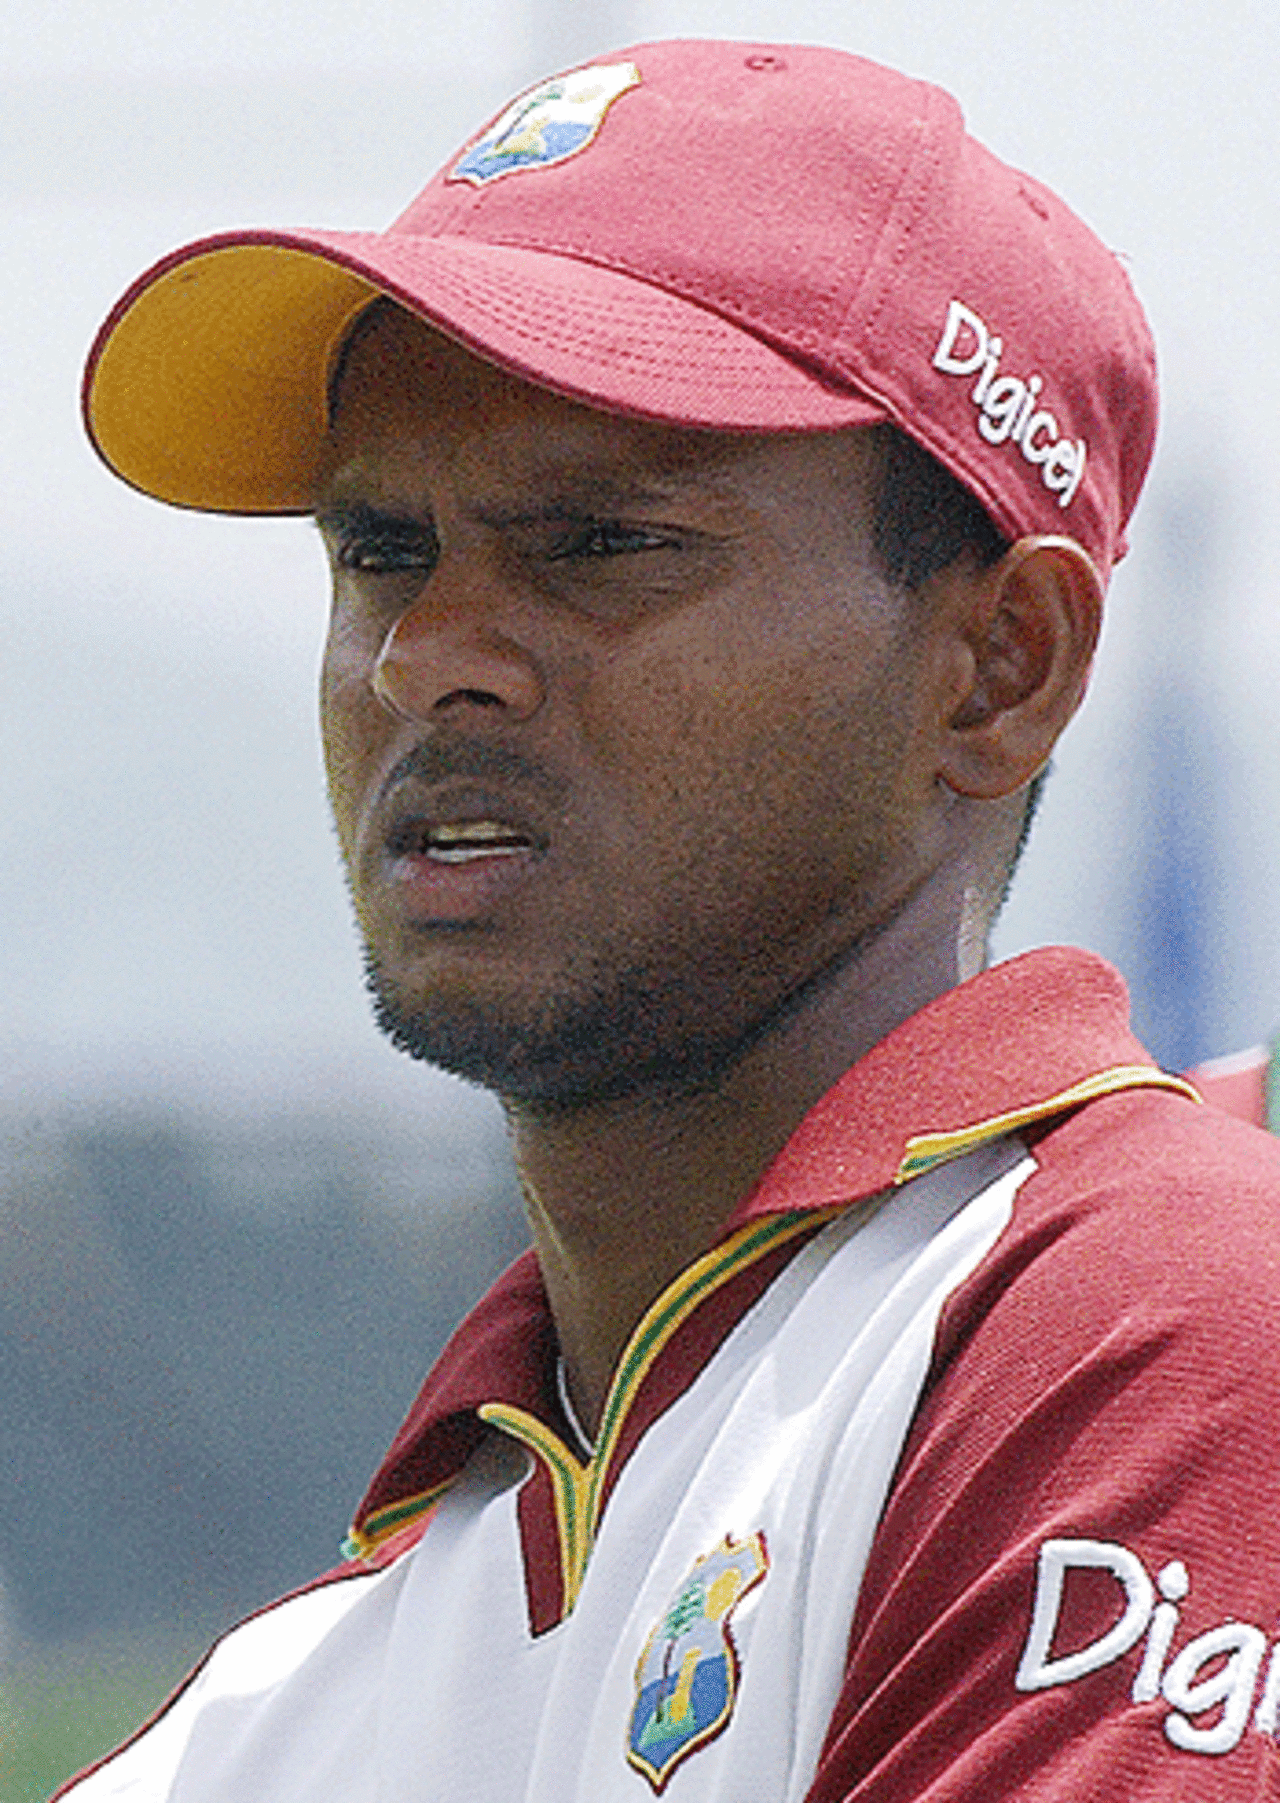 Shivnarine Chanderpaul watches his teammates during a practice session at  Kandy, July 21, 2005